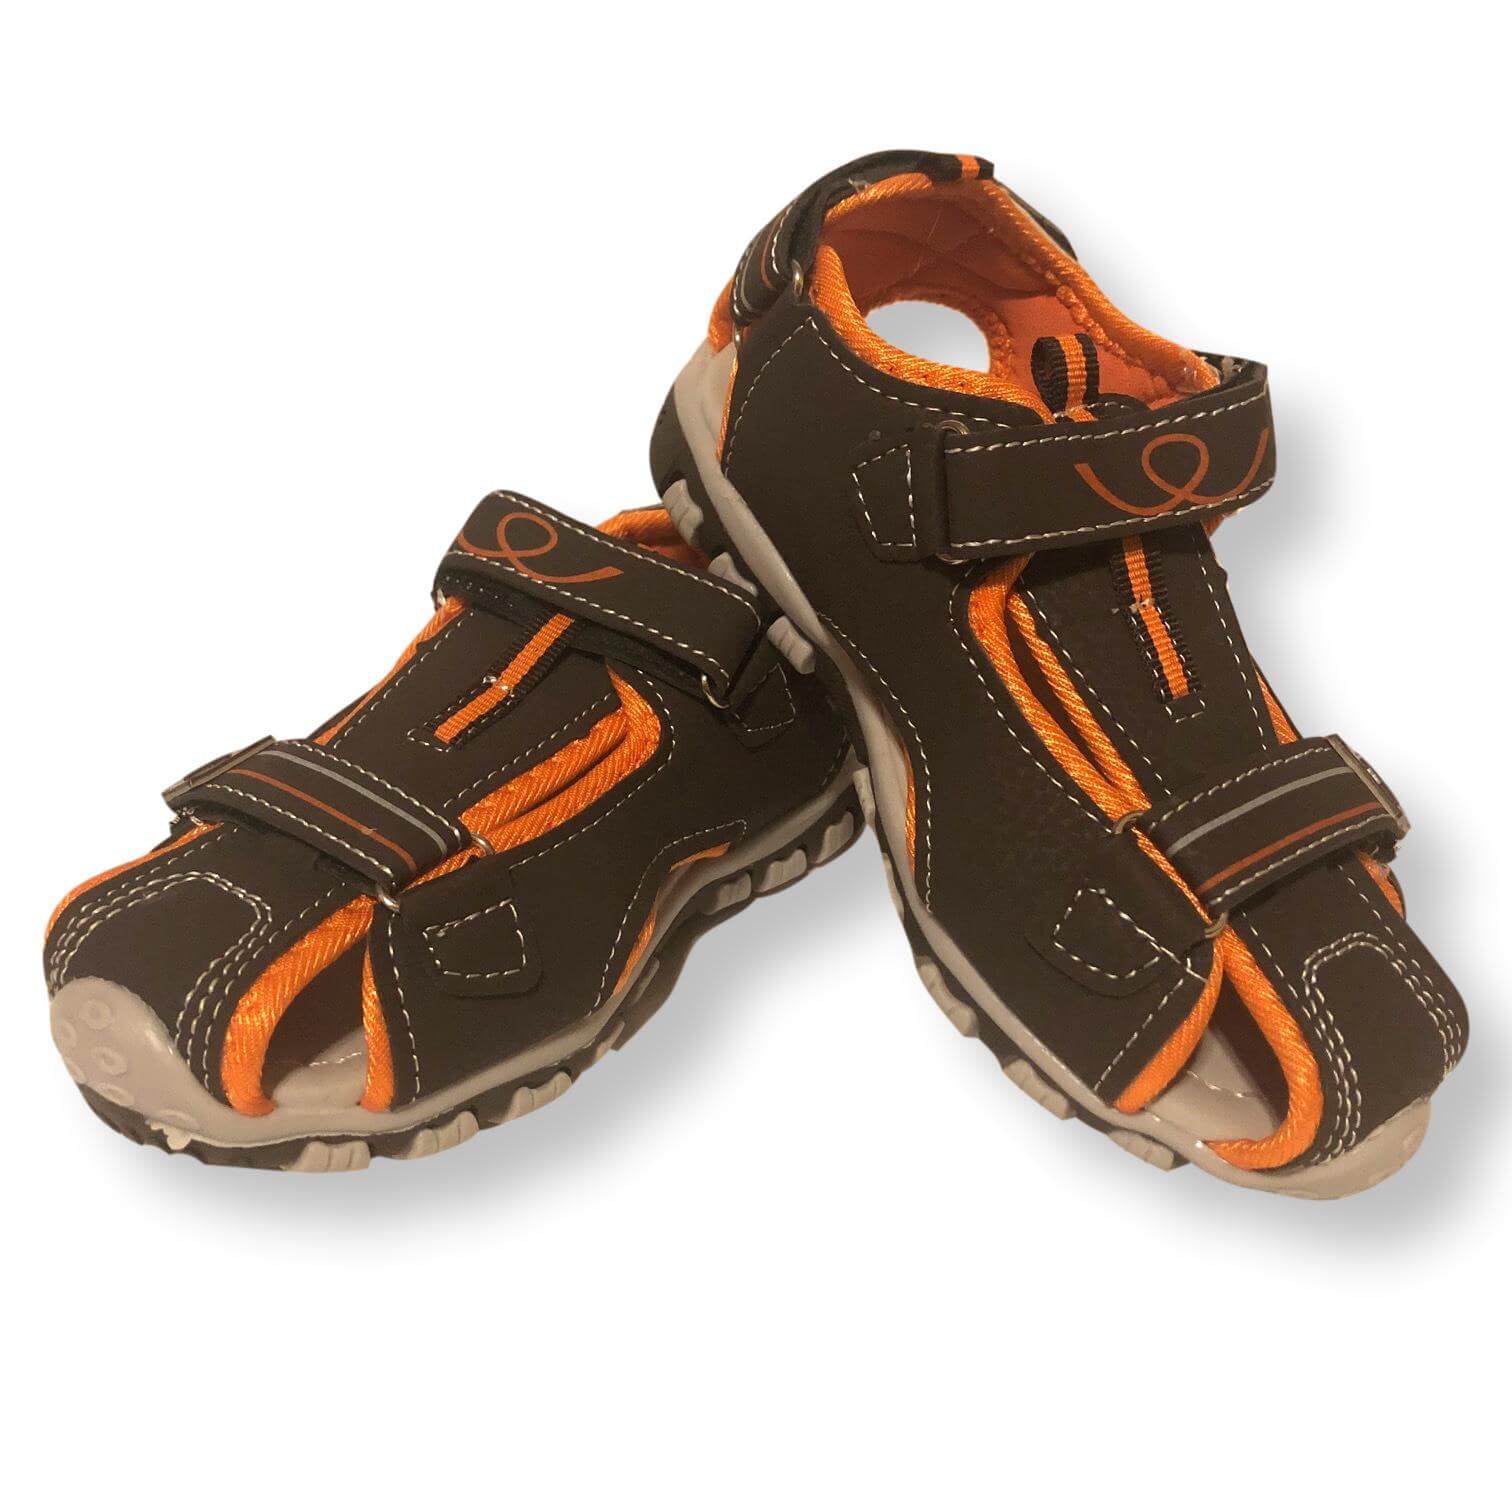 Mubeuo Leather Athletic Closed Toe Kids Boys Toddler Sandals 